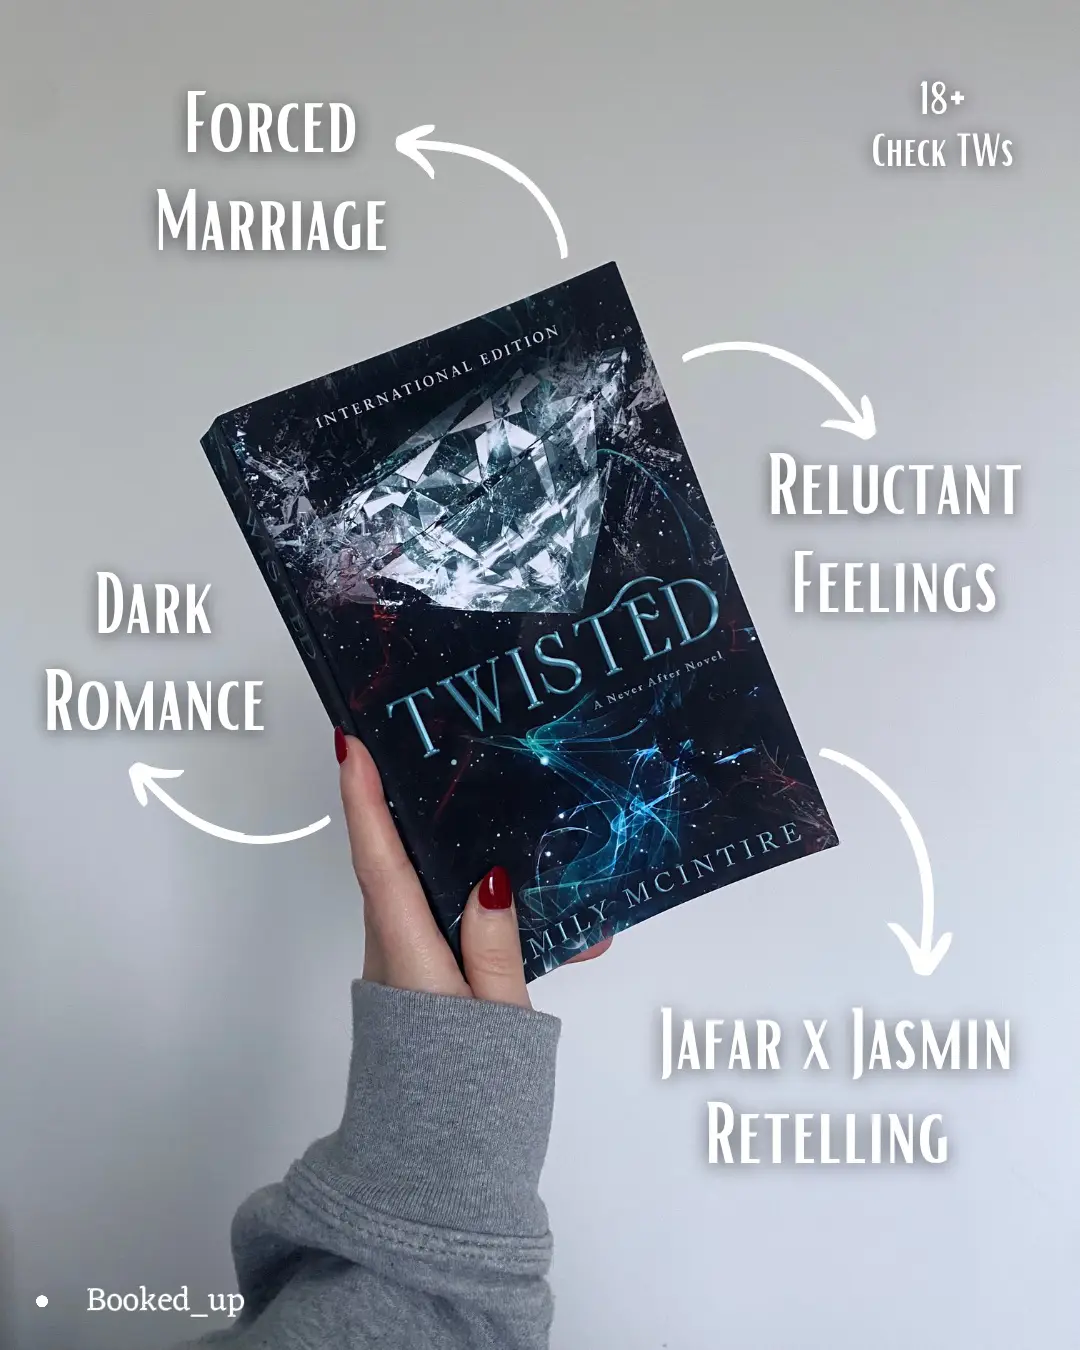 TWISTED, EMILY MCINTIRE, BLOOM BOOKS